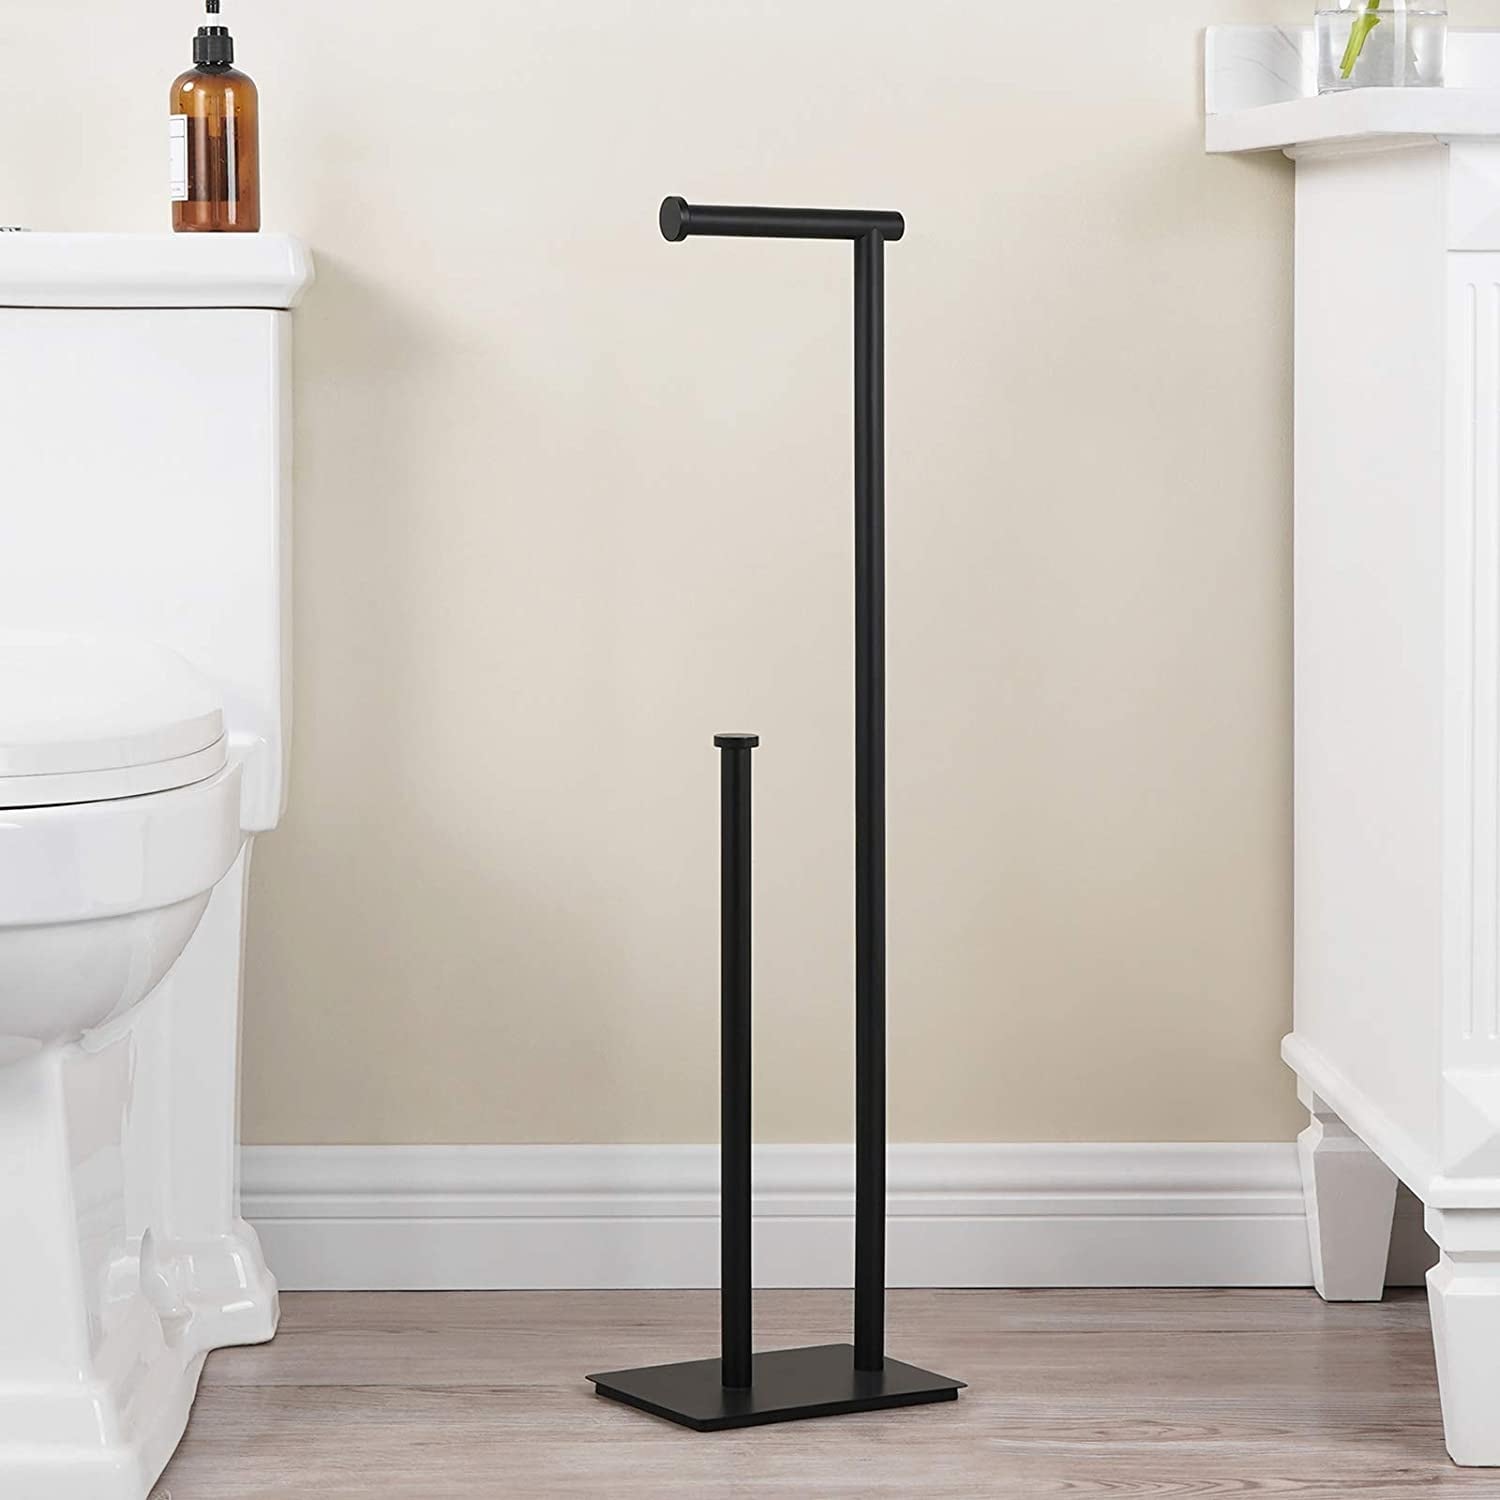 https://ak1.ostkcdn.com/images/products/is/images/direct/90a9a1bc439f6596cb117426714d605697d7eaed/29%22-Height-Freestanding-Toilet-Paper-Holder-with-Reserve.jpg